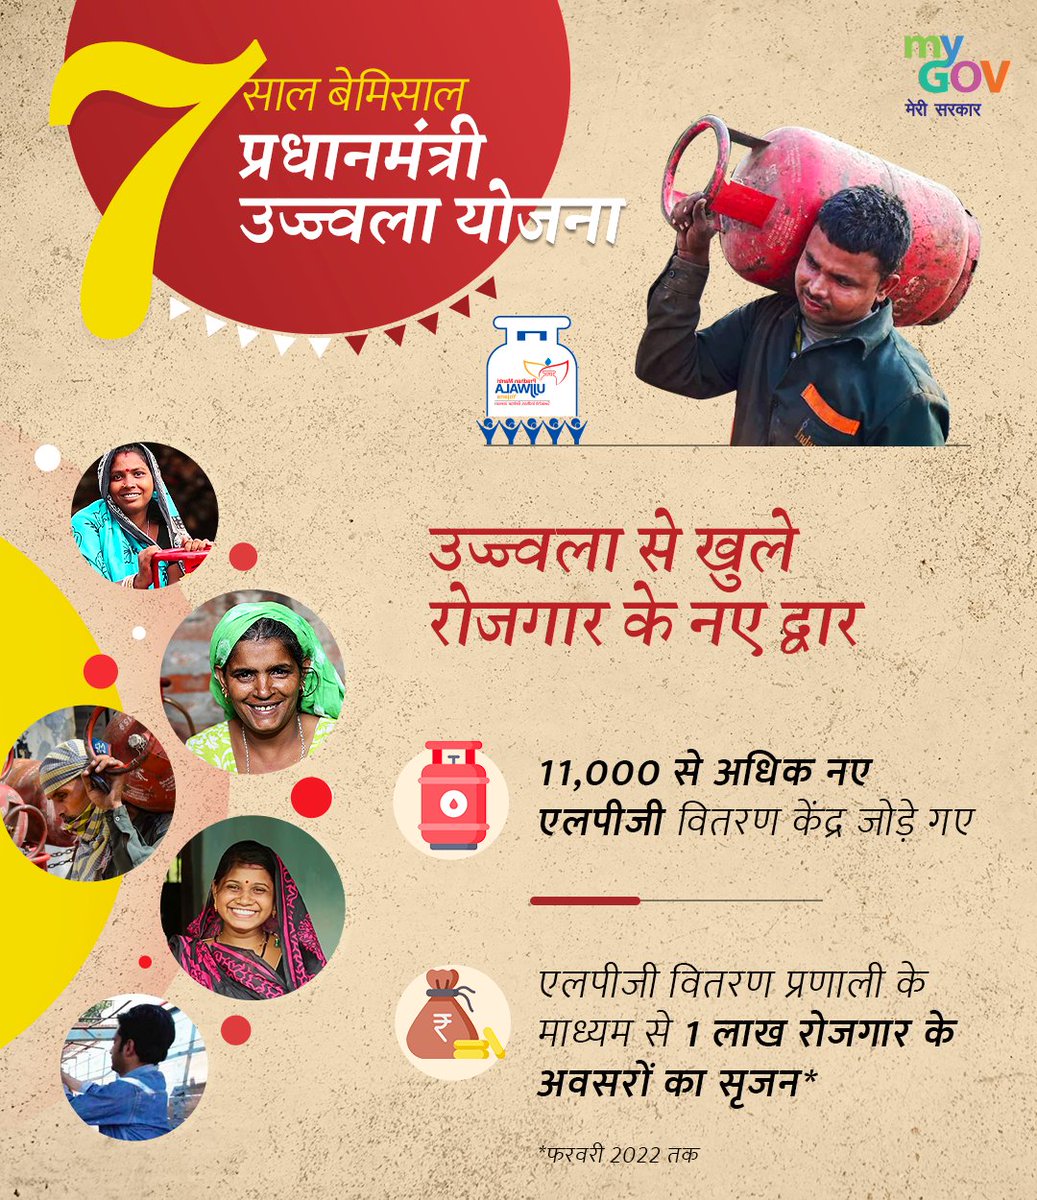 Ujjwala Yojana is not just opening new doors for clean cooking fuel but also for employment!

With a focus on local entrepreneurship & women empowerment, it's creating new job opportunities and boosting economic growth. 

#7YearsOfUjjwala
#UjwallaSeUjwalBharat
#UjjwalaYojana